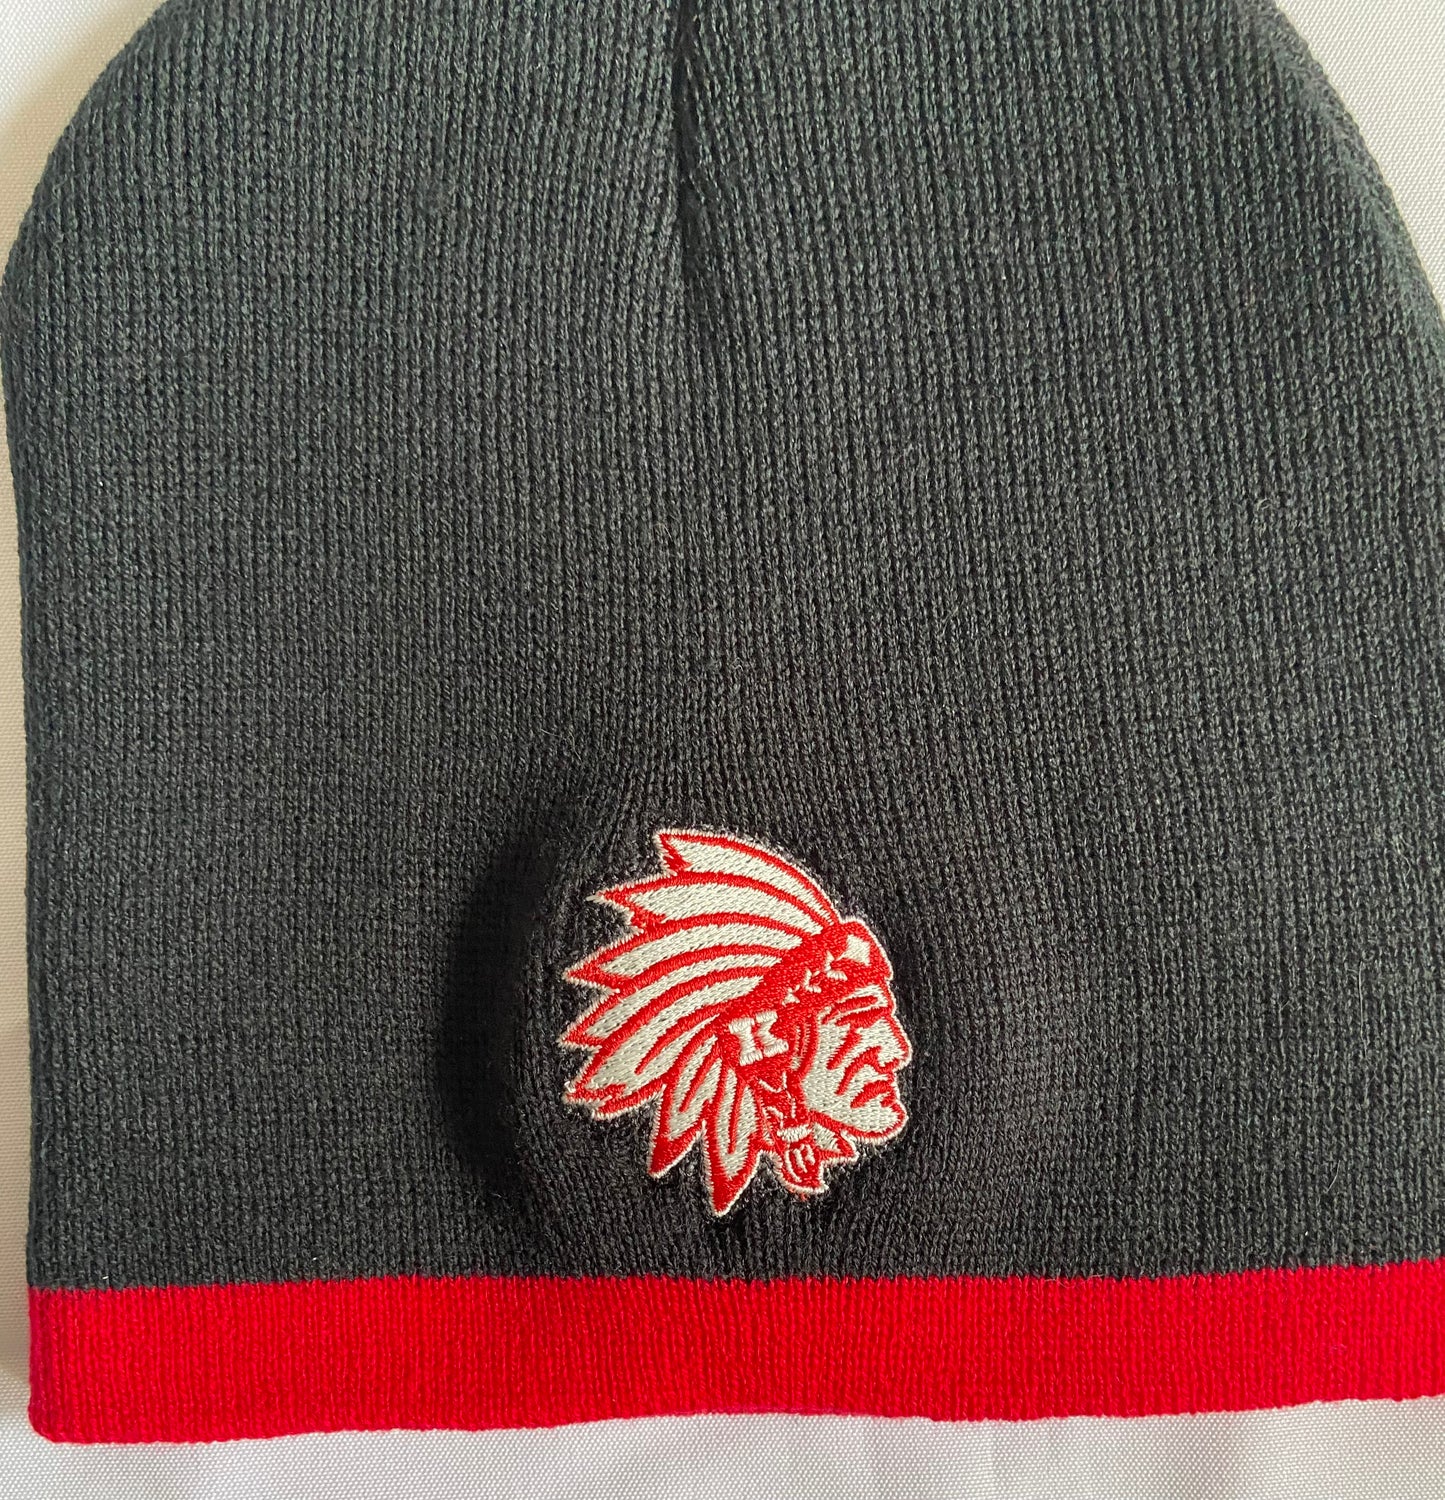 Knox Redskins Embroidered Logo Beanie - Winter Hat - Black with Red stripe